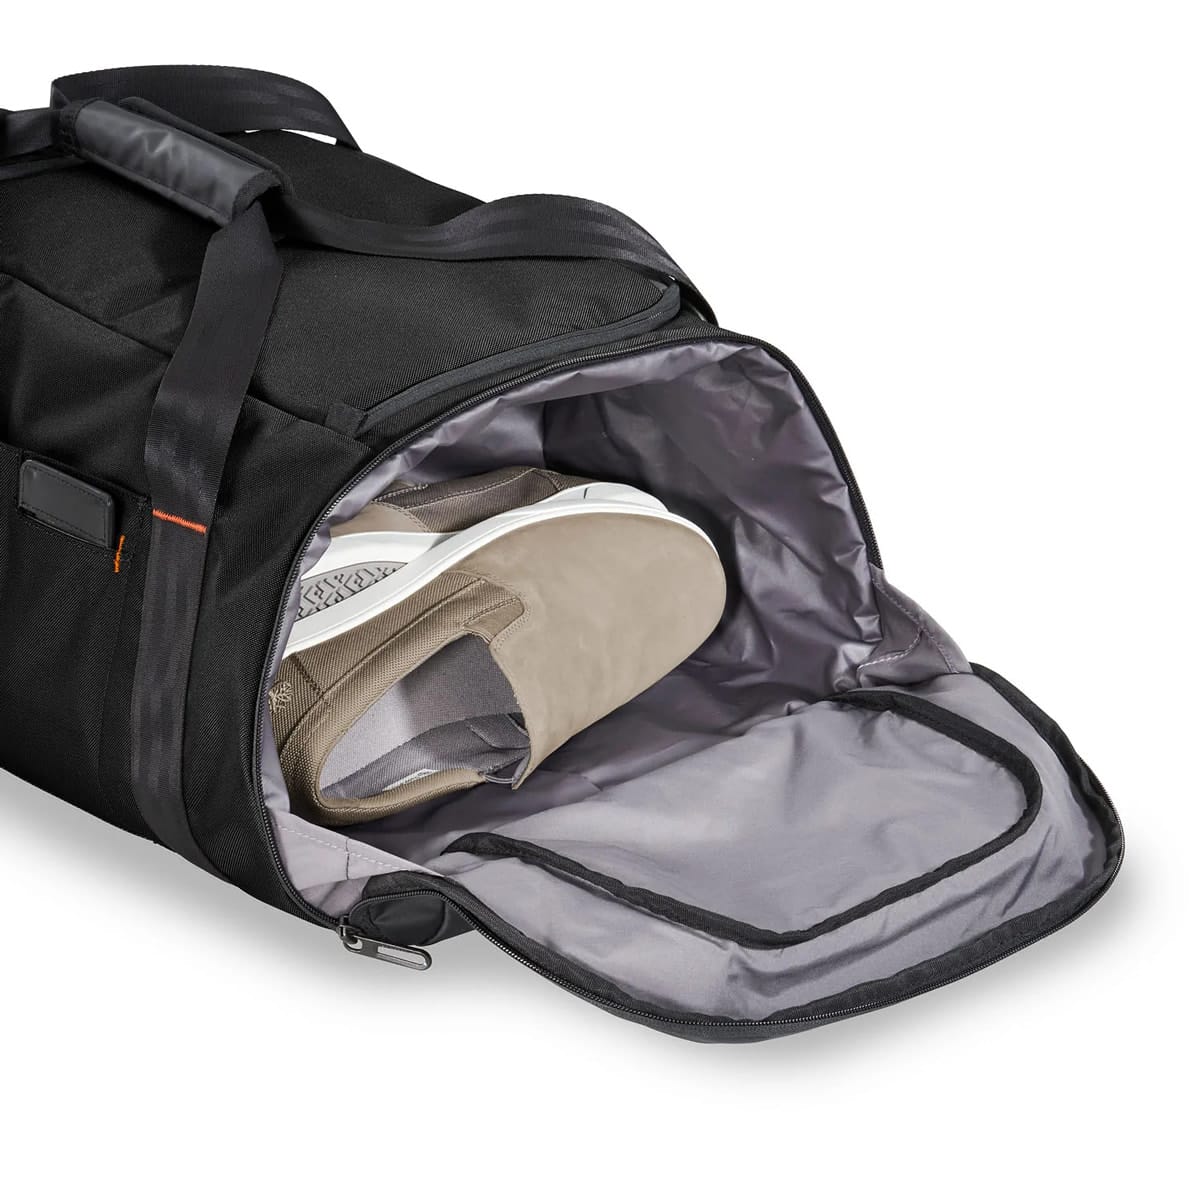 Large weekender bag with shoe compartment